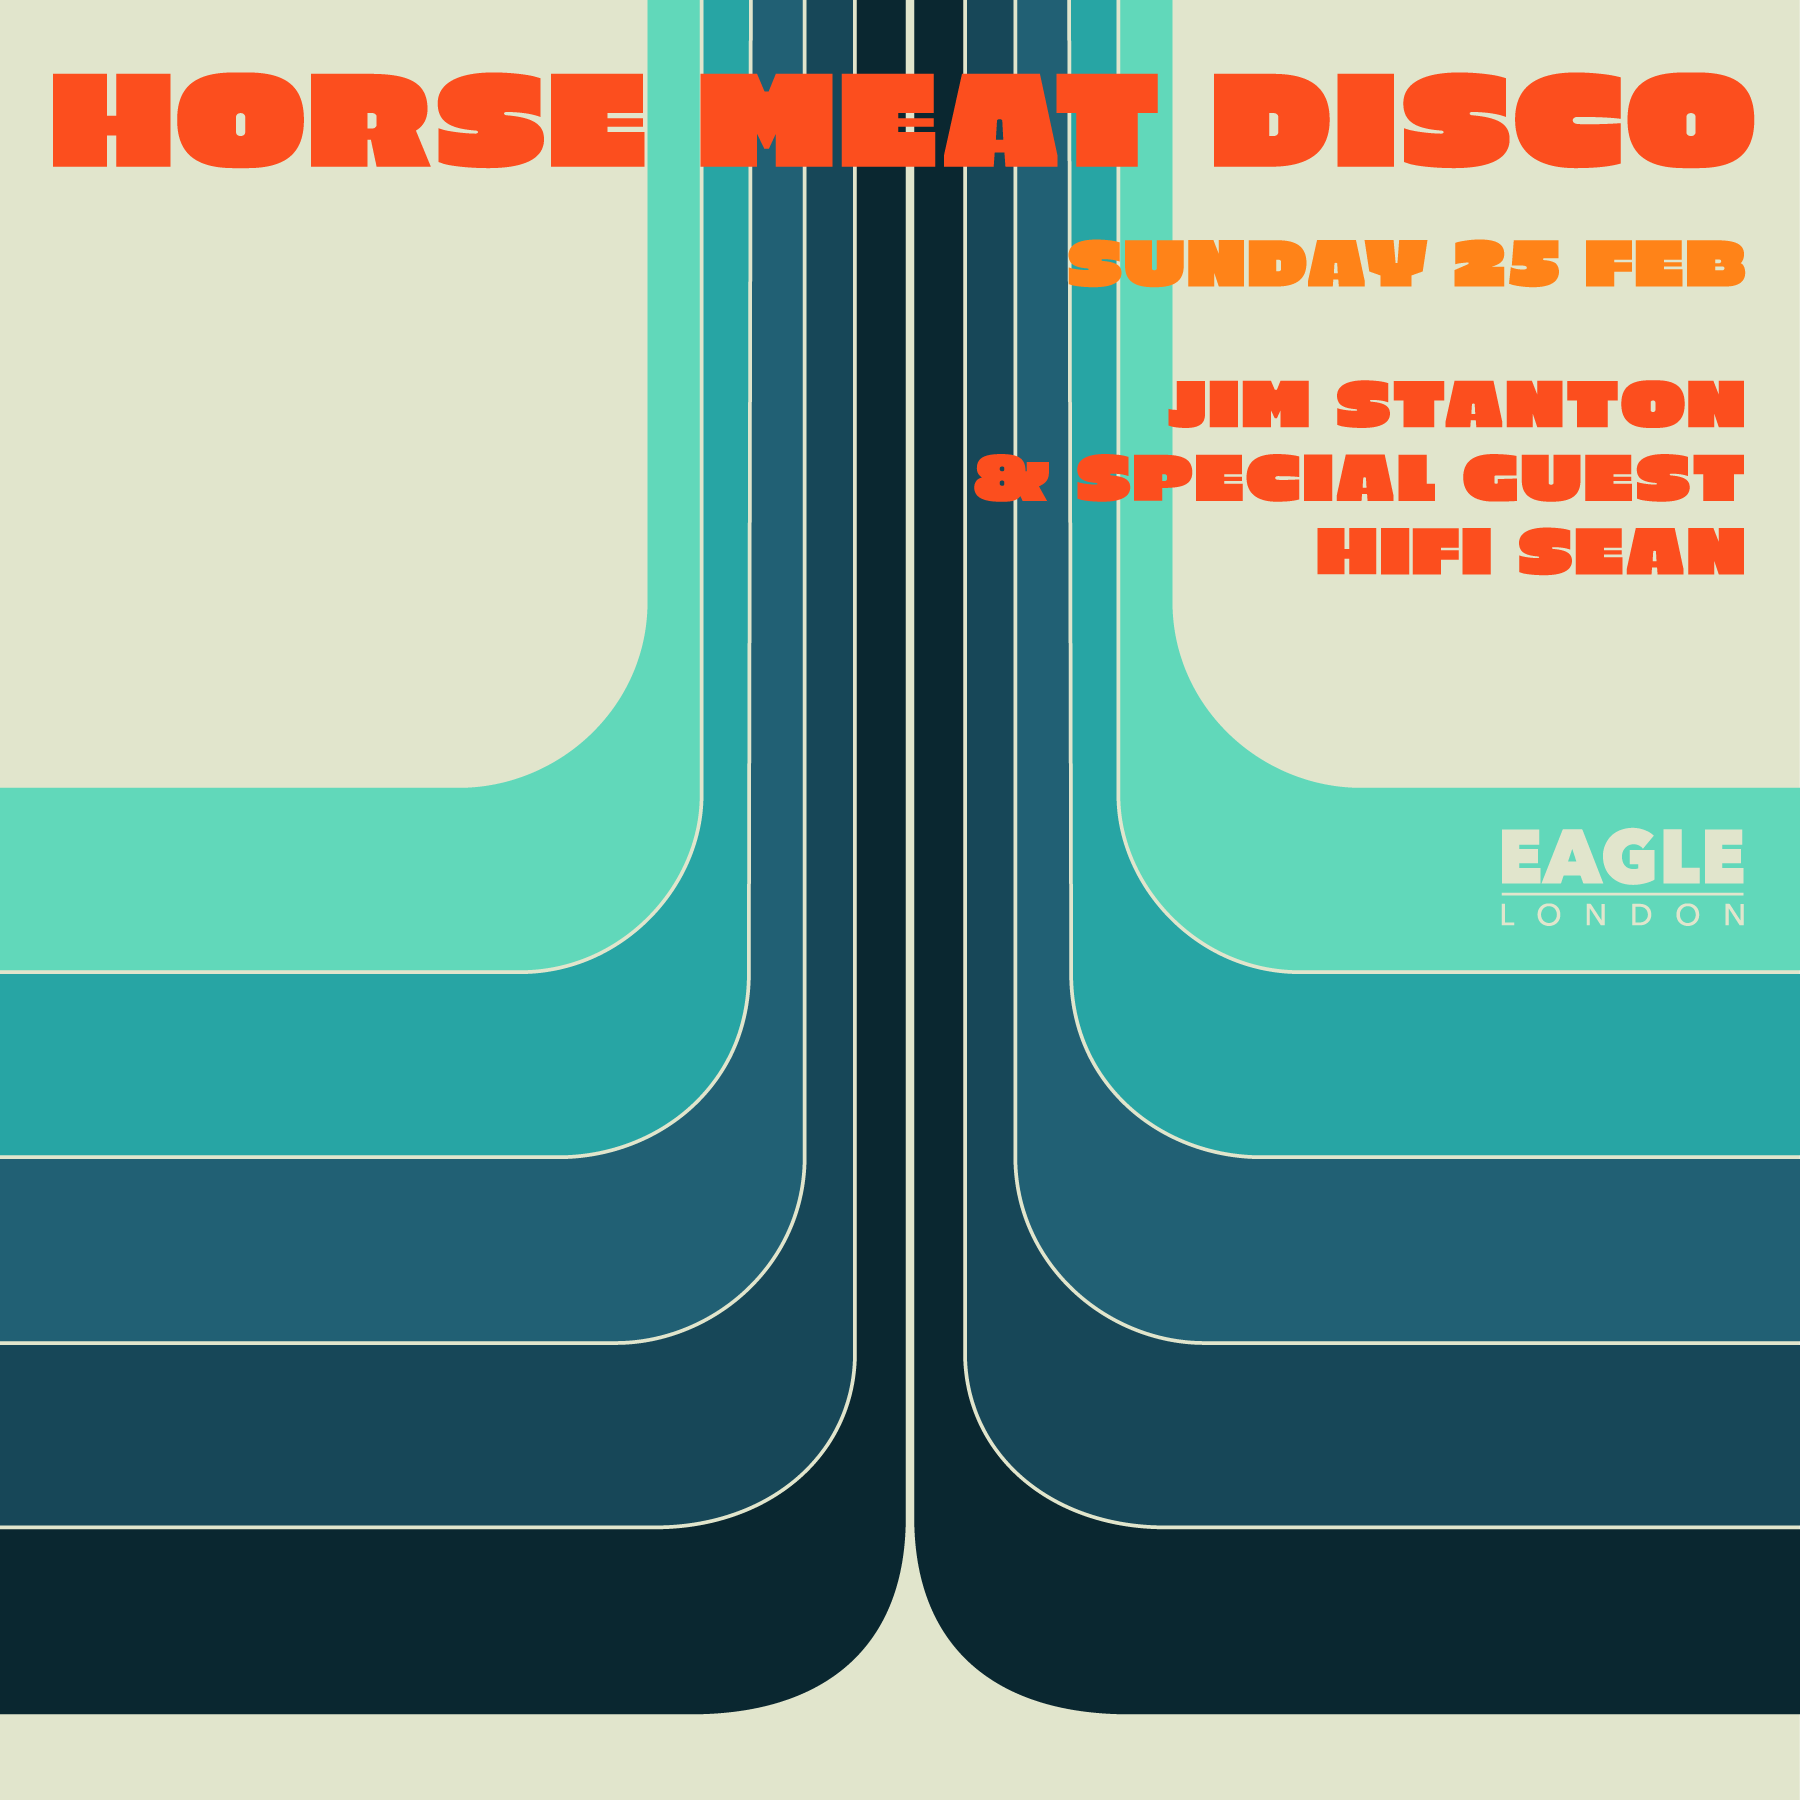 Horse Meat Disco - The Legendary Sunday Night Discotheque - フライヤー表